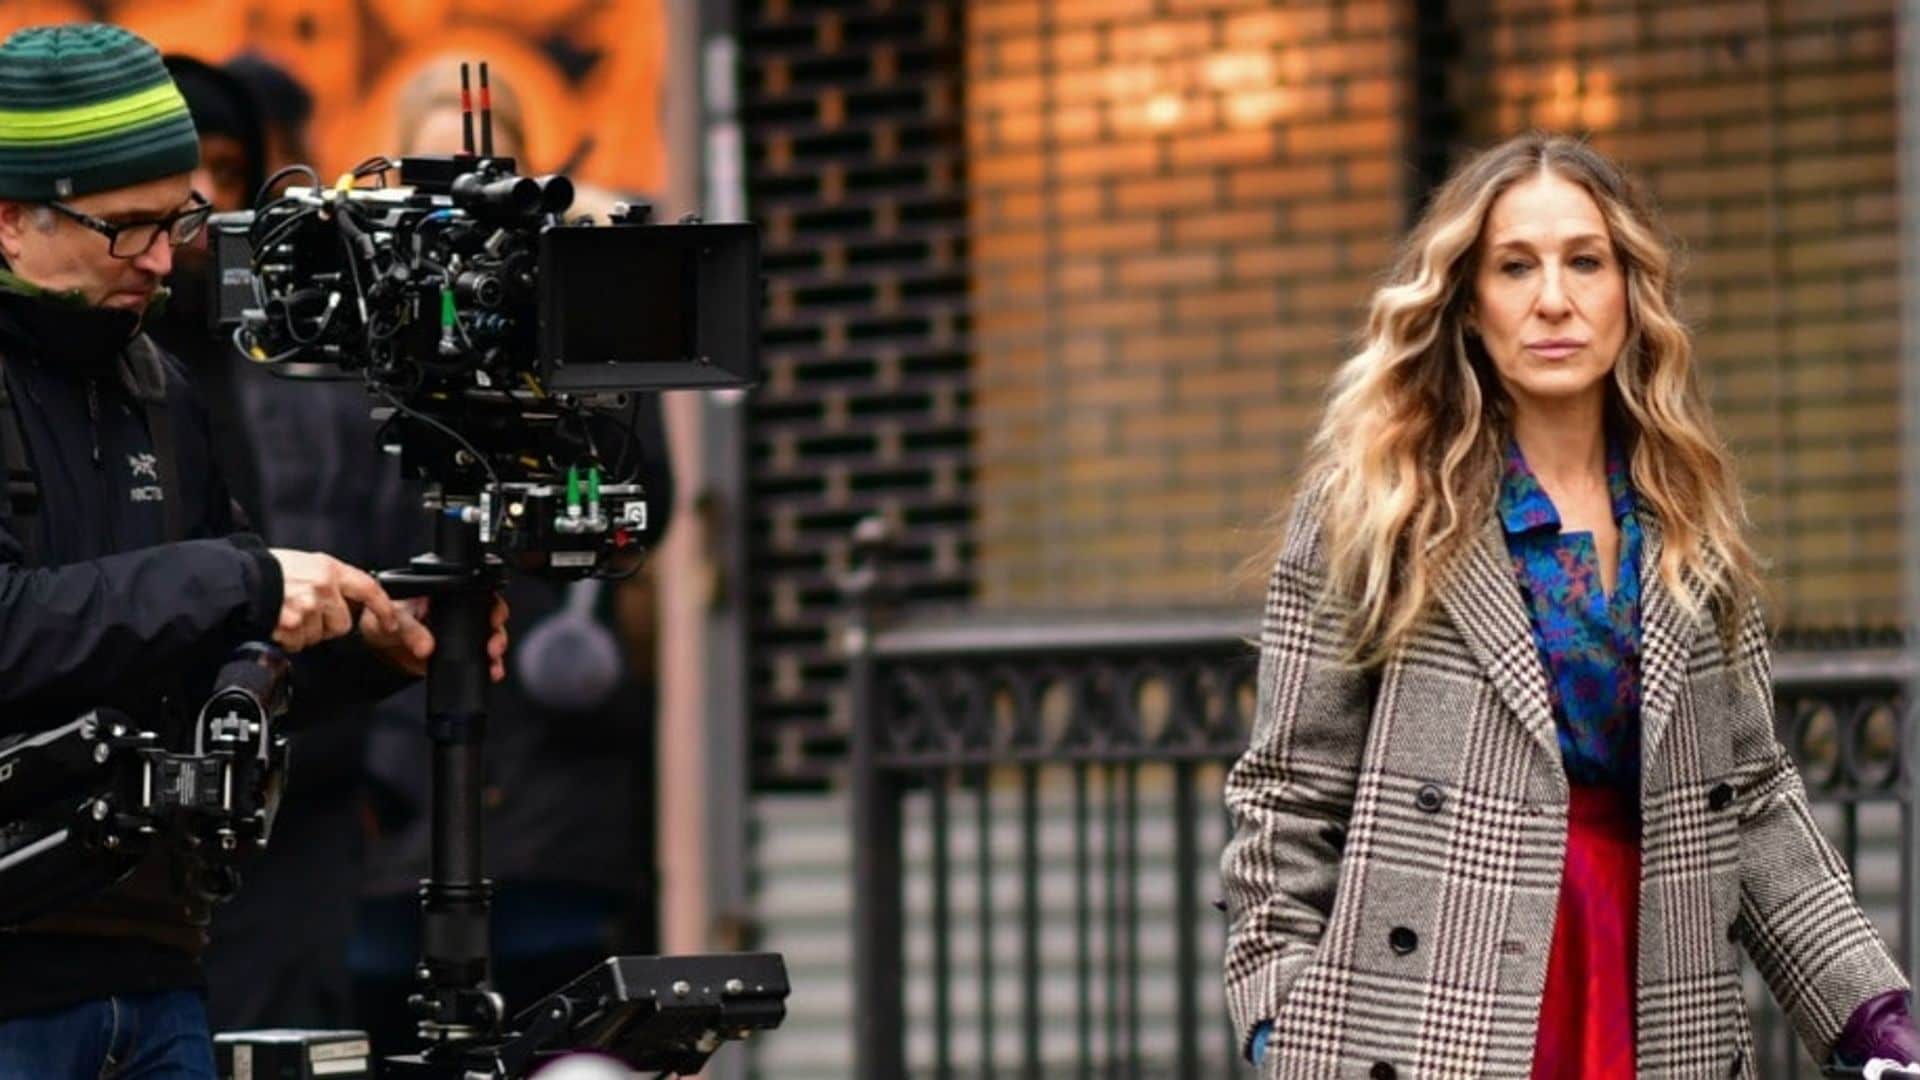 Grab your heels - Sarah Jessica Parker returns to 'Sex and the City' character Carrie Bradshaw!